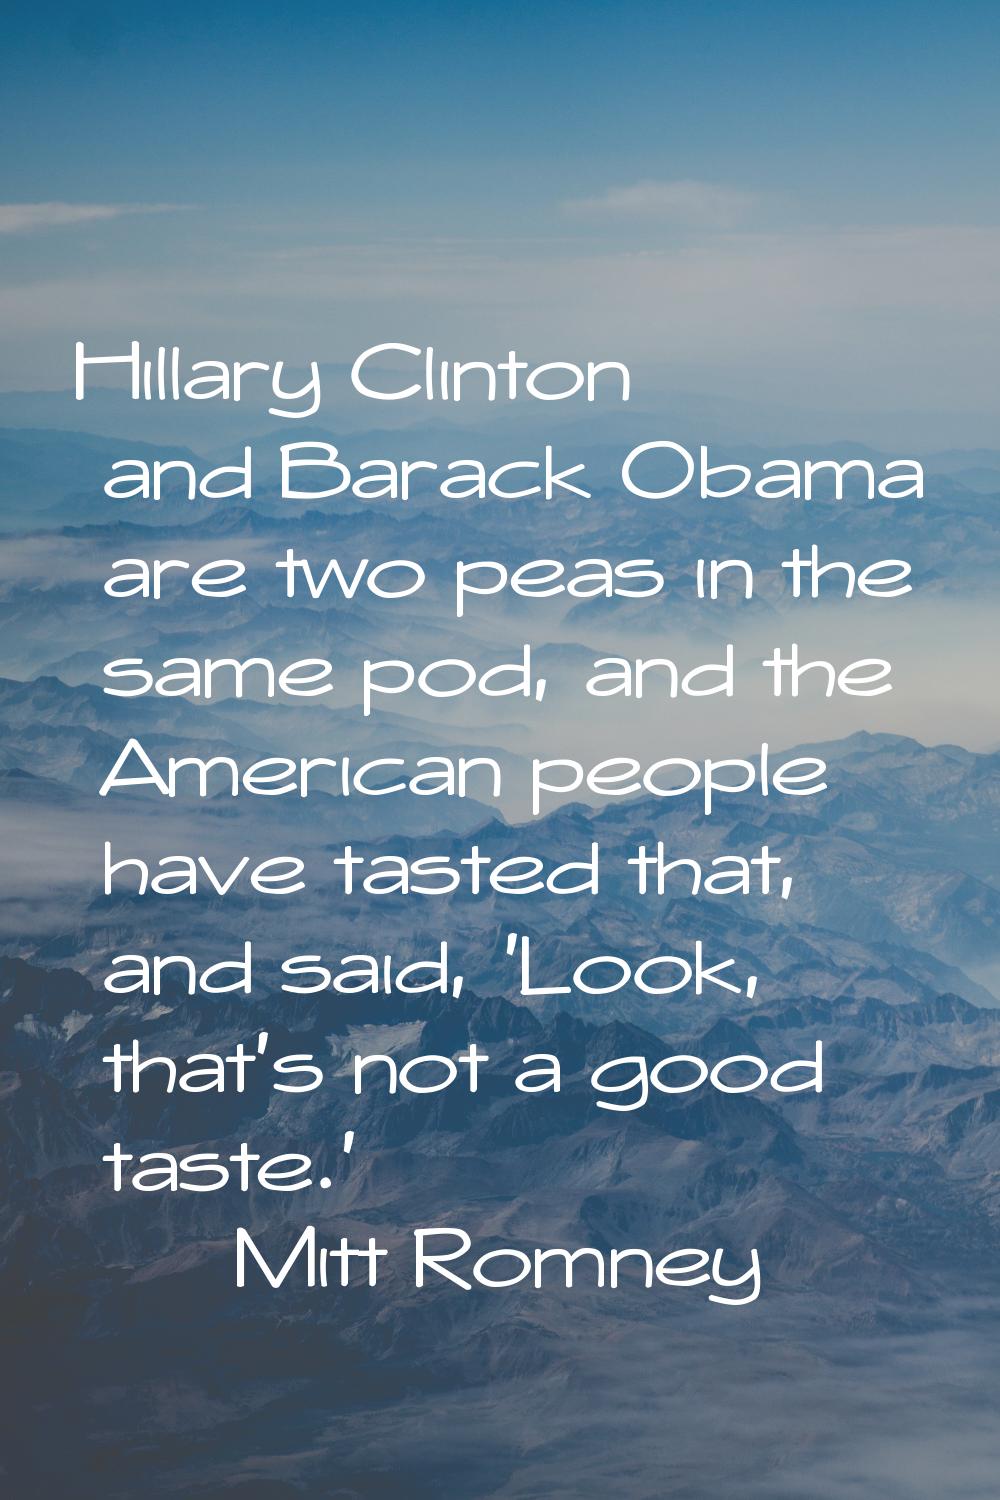 Hillary Clinton and Barack Obama are two peas in the same pod, and the American people have tasted 